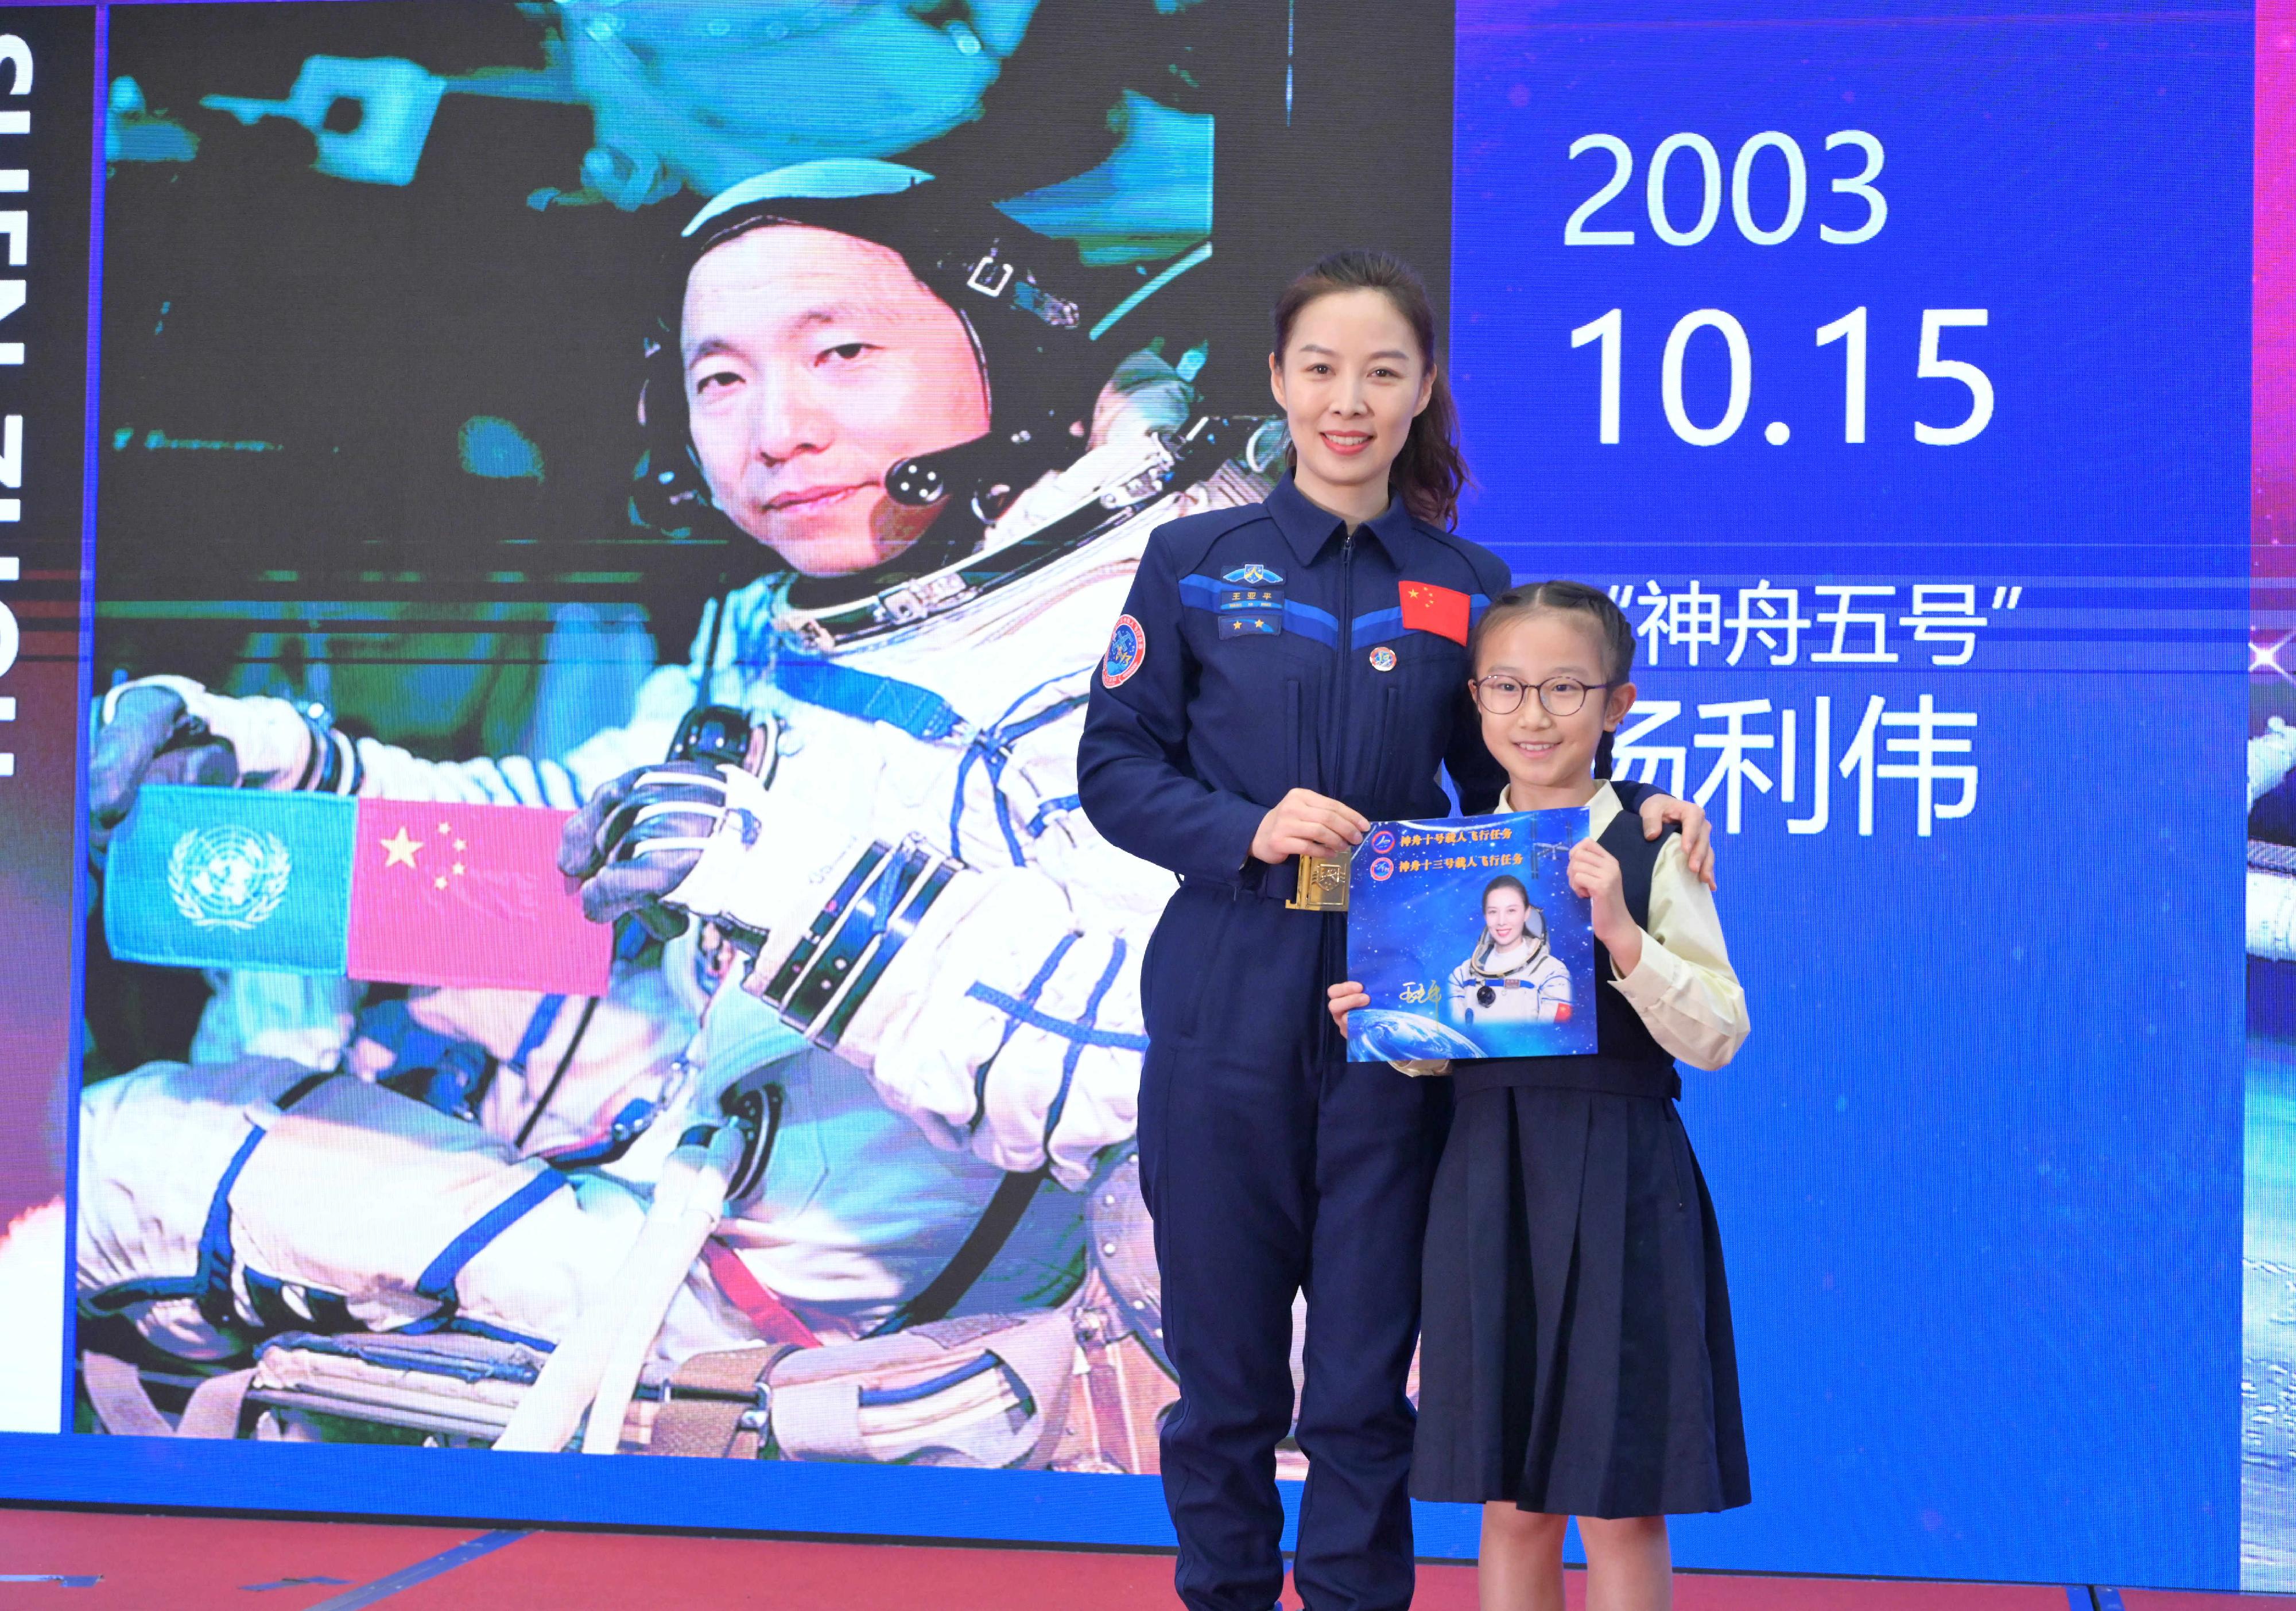 The China Manned Space delegation continued their visit in Hong Kong today (November 29). Photo shows Shenzhou-13 astronaut Ms Wang Yaping (left) attending a dialogue session with students at Hong Kong Baptist University Affiliated School Wong Kam Fai Secondary and Primary School (Primary Division).





